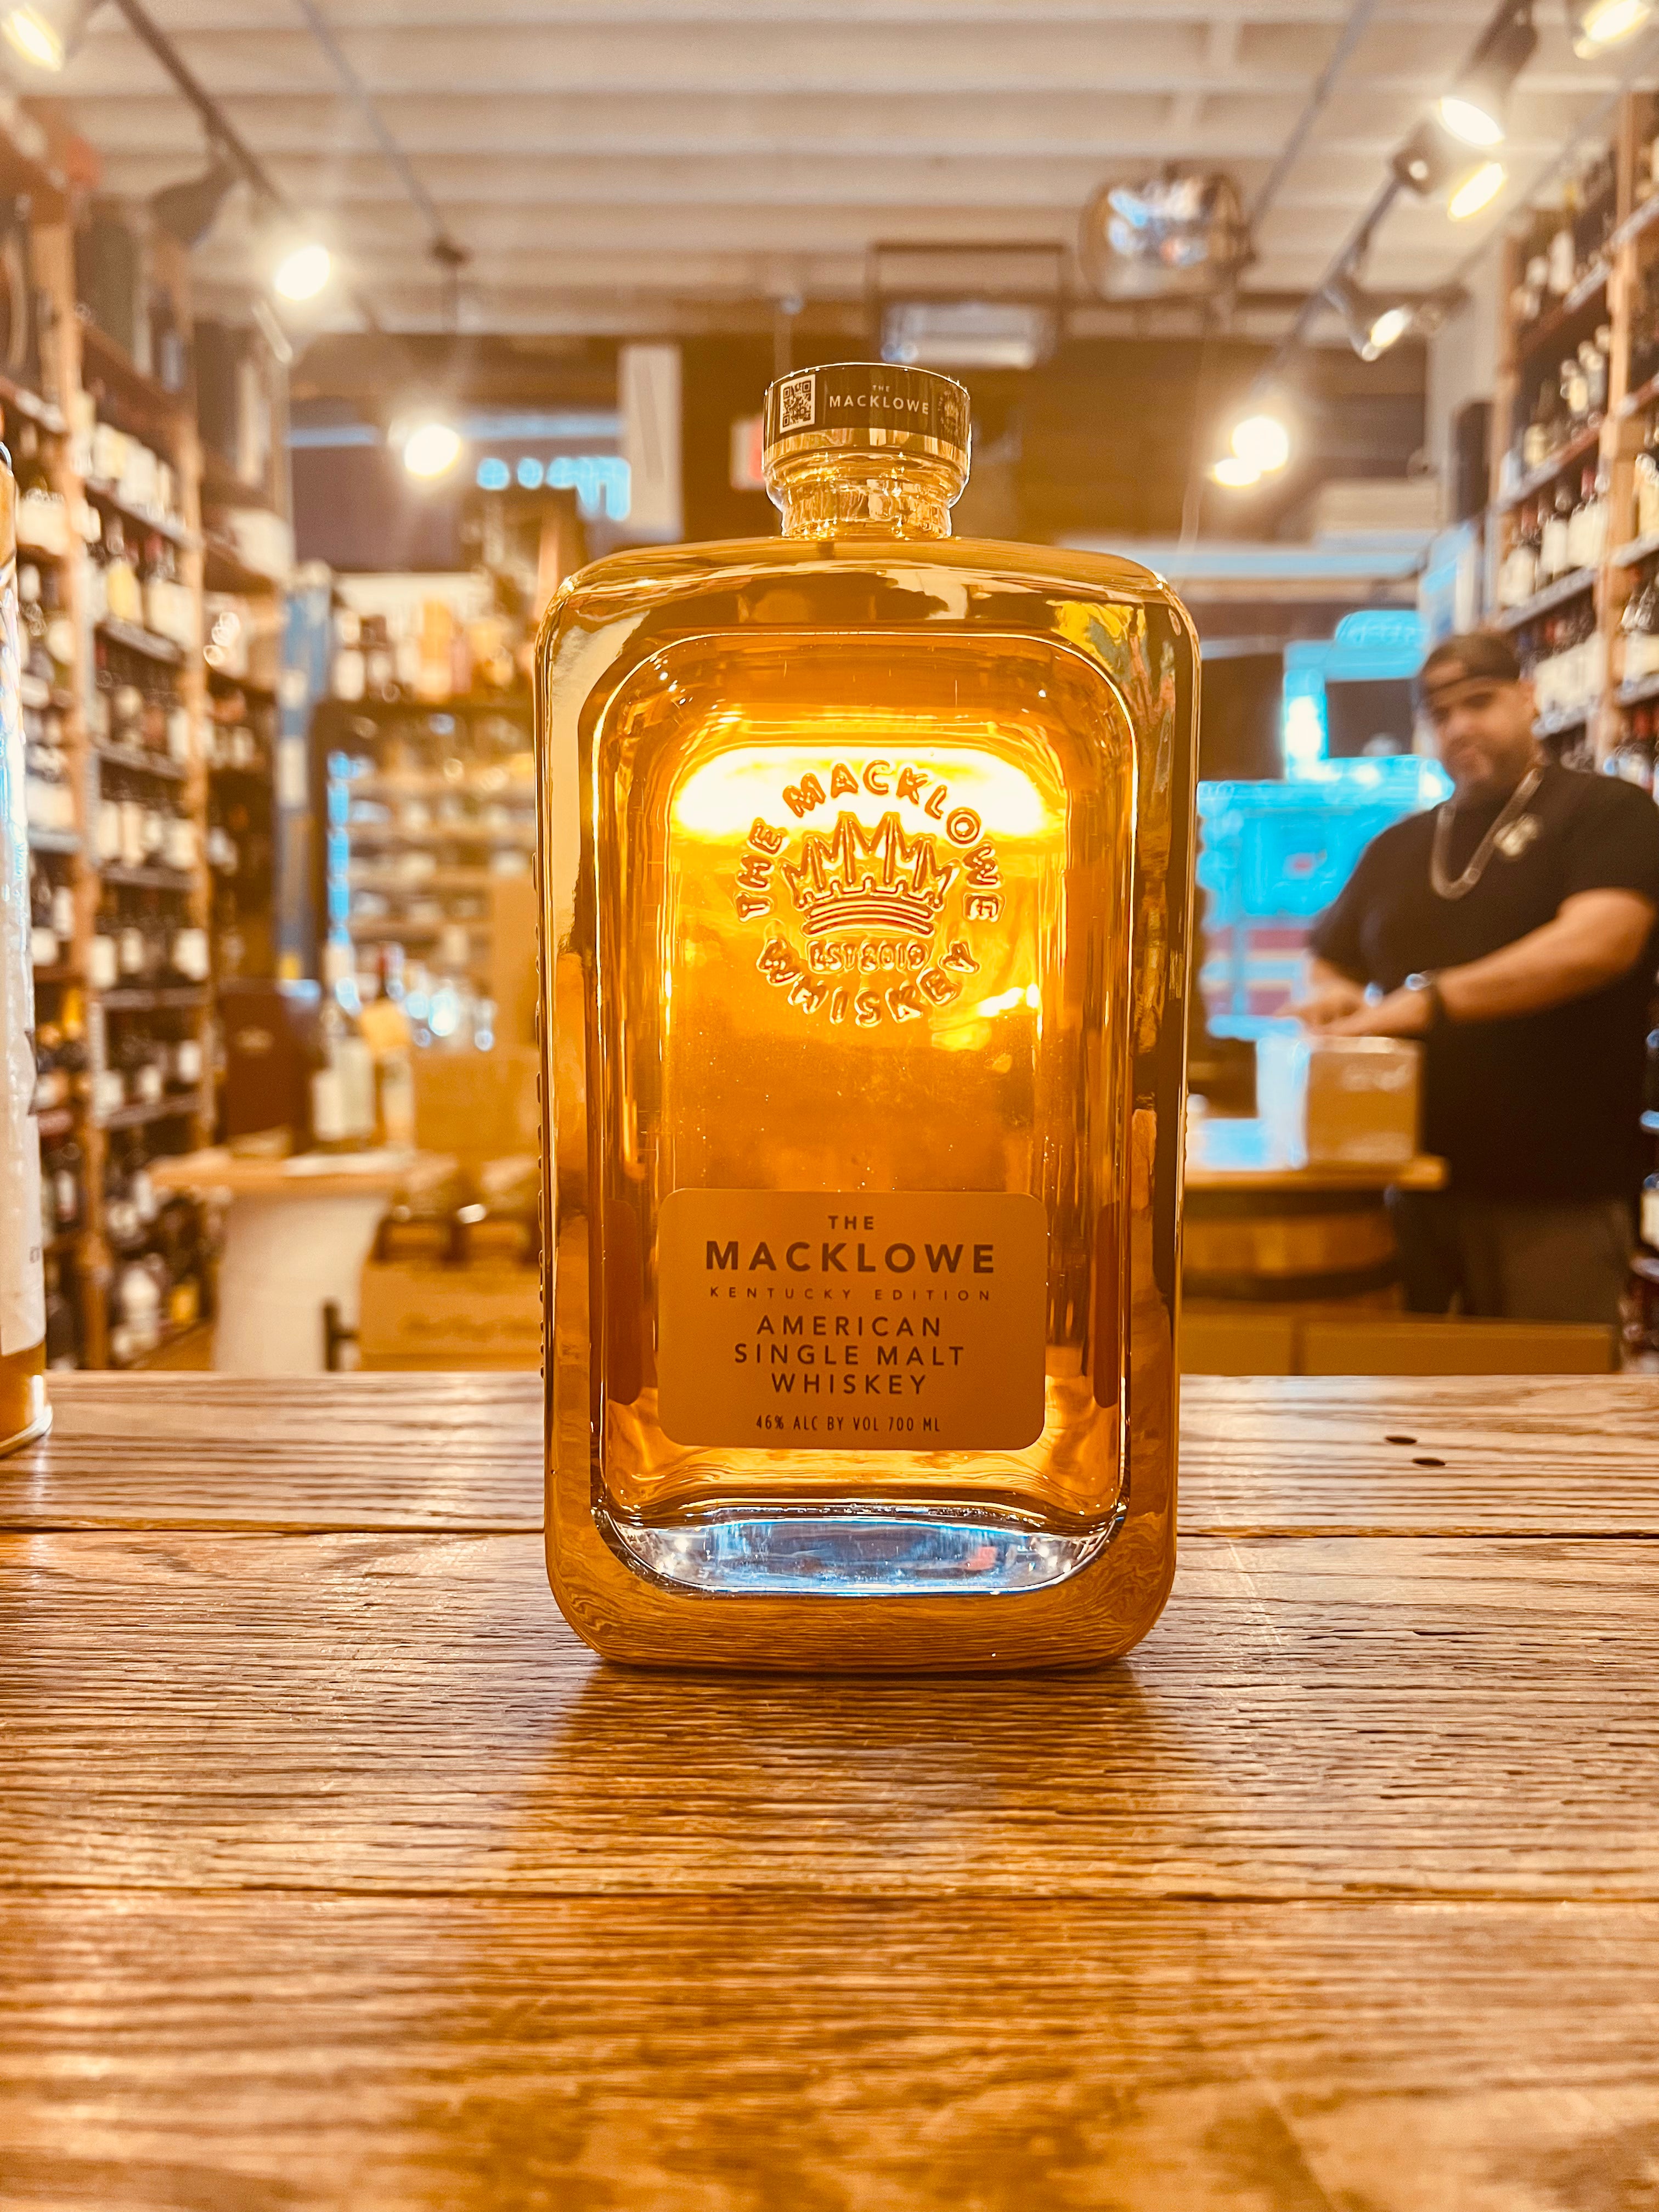 The Macklowe Gold Kentucky Edition 700ml a squared clear glass bottle with a short stubby neck with a golden cast around the glass bottle and a golden label